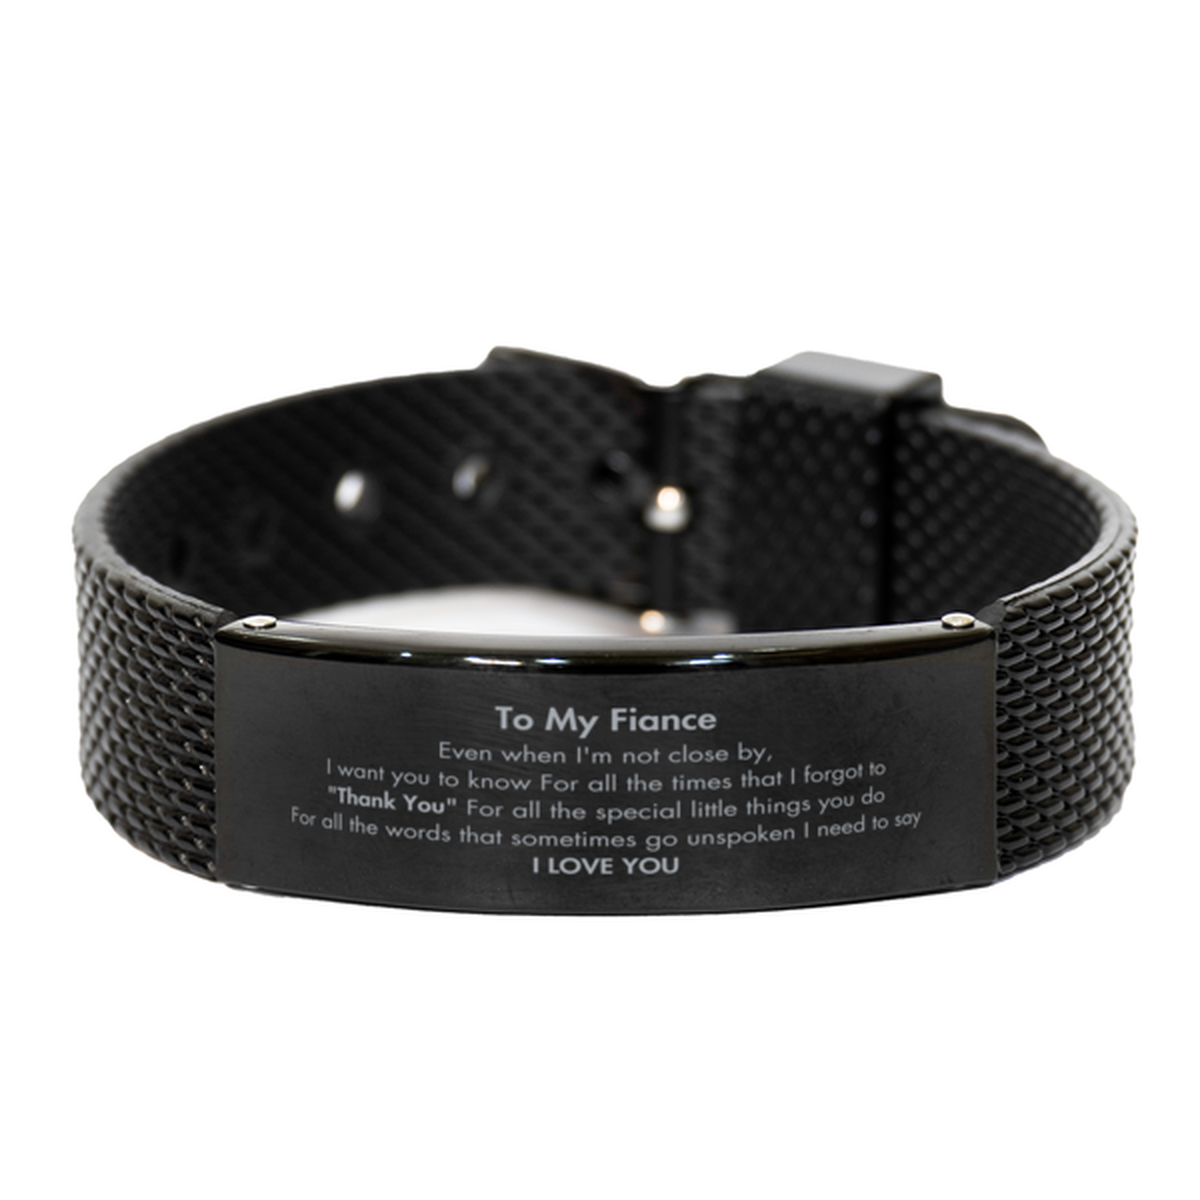 Thank You Gifts for Fiance, Keepsake Black Shark Mesh Bracelet Gifts for Fiance Birthday Mother's day Father's Day Fiance For all the words That sometimes go unspoken I need to say I LOVE YOU